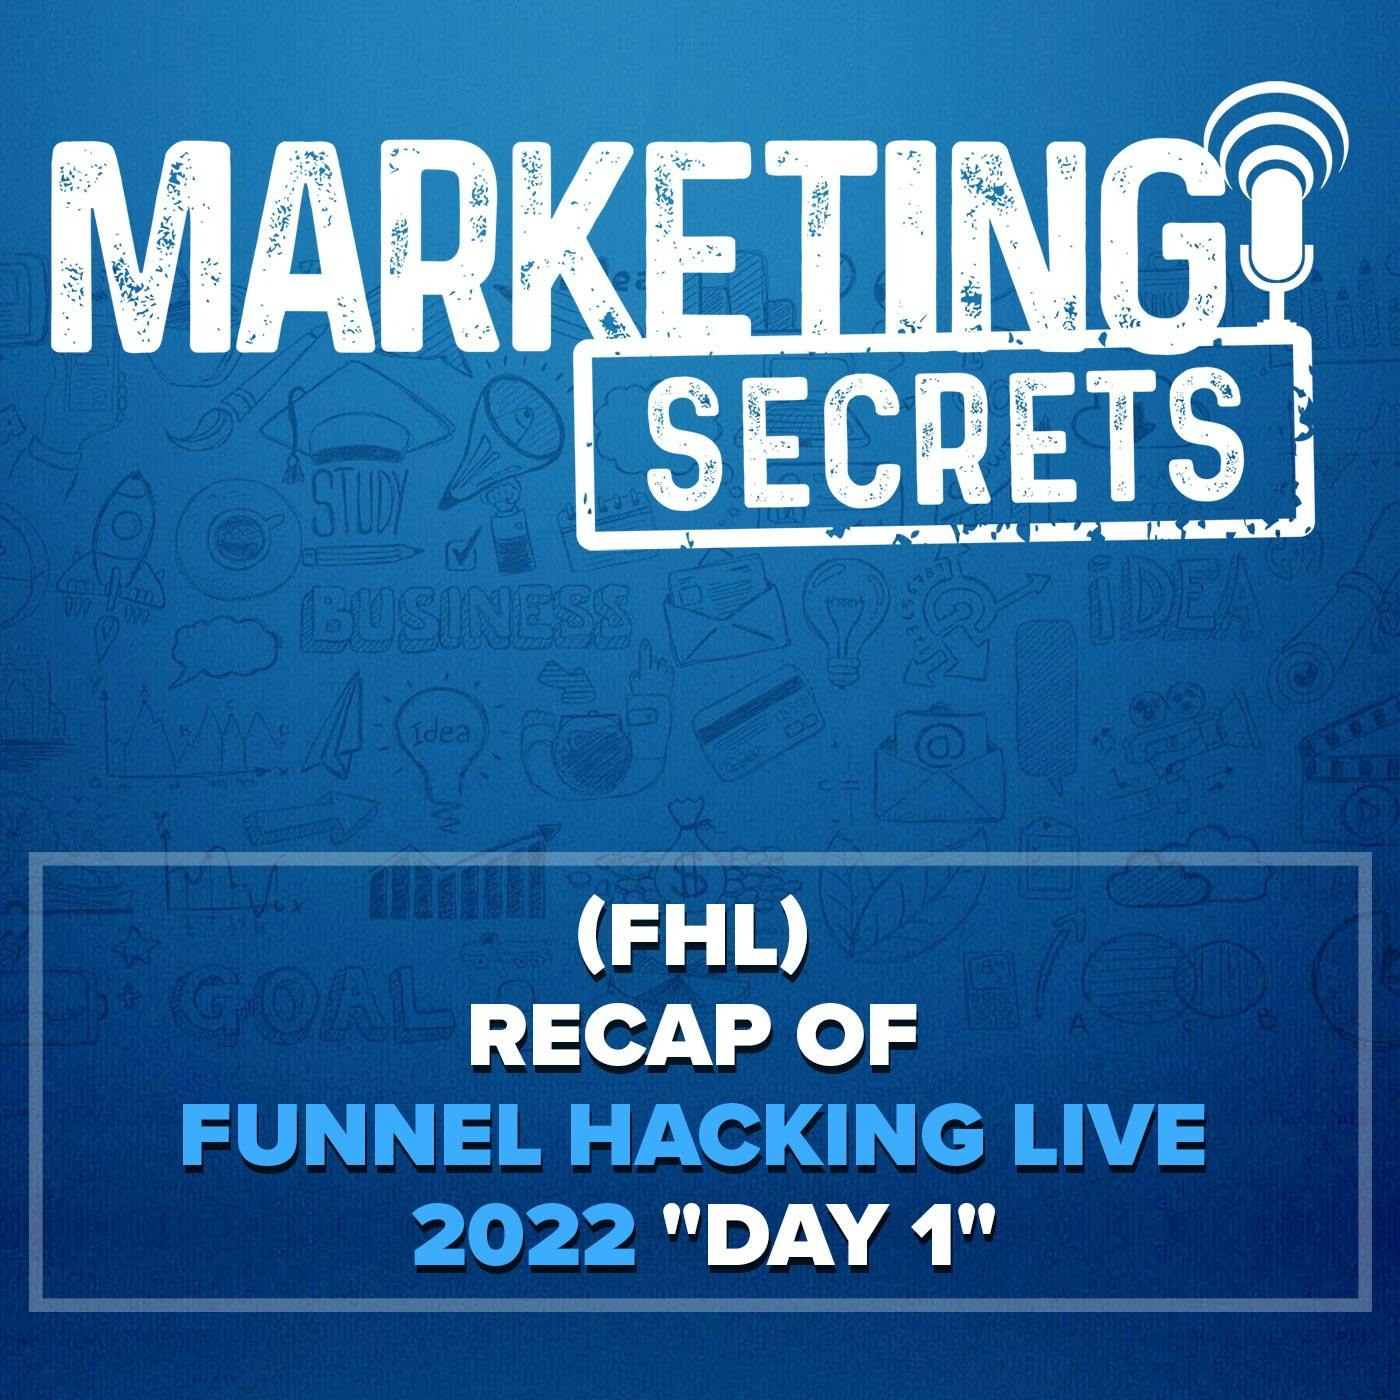 (FHL) Recap of Funnel Hacking Live 2022 "Day 1"